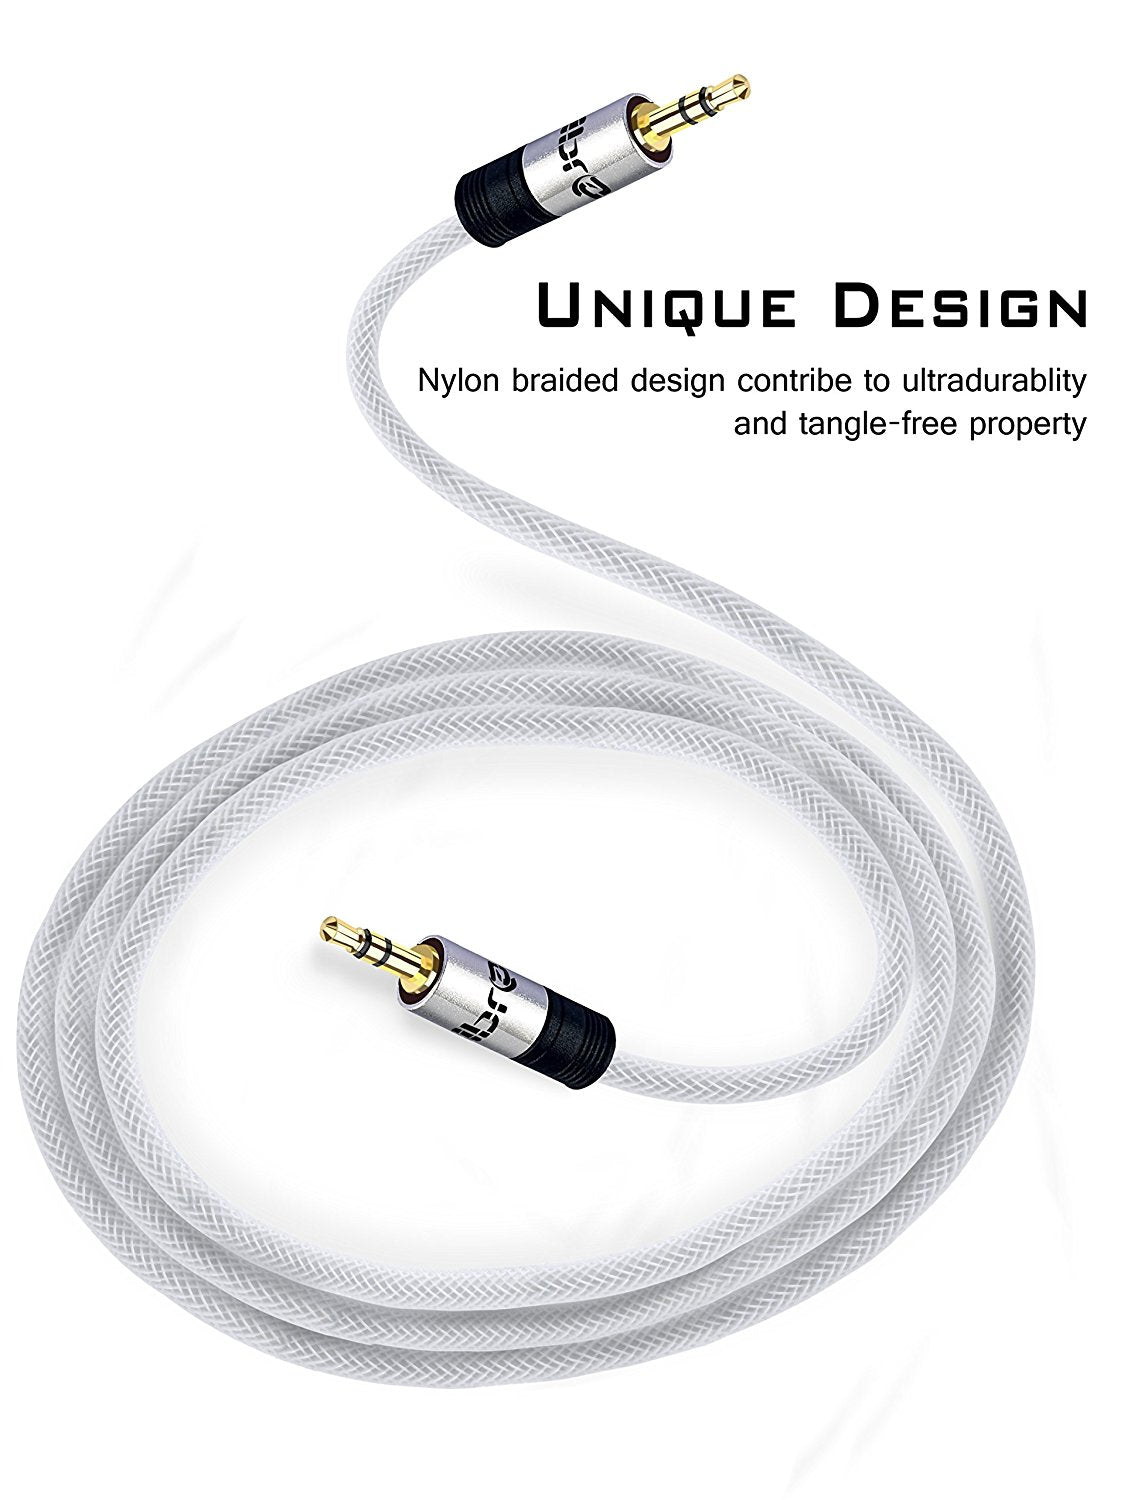 3.5mm Stereo Jack to Jack Audio Cable Lead Gold 7.5m- IBRA Silver Series